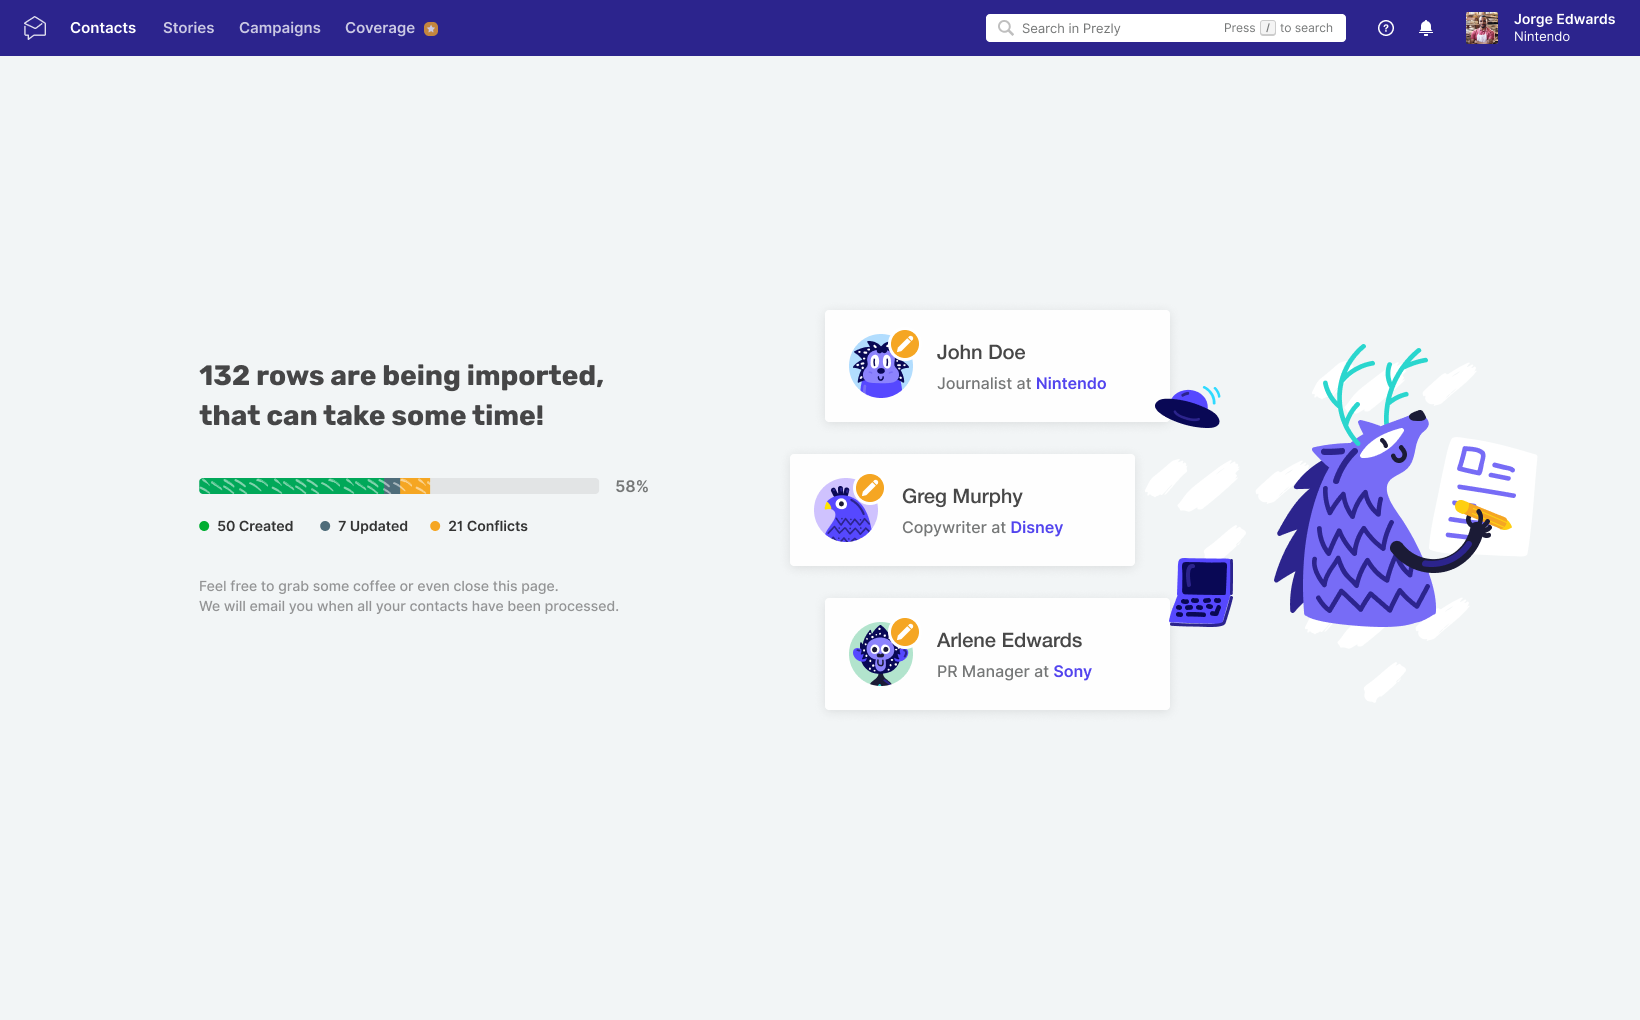 [browser]And while your file is being imported, you have live updates on how the import is going. Your snazzy purple assistant is here to make sure that everything runs smoothly, so you can feel free to leave the page.